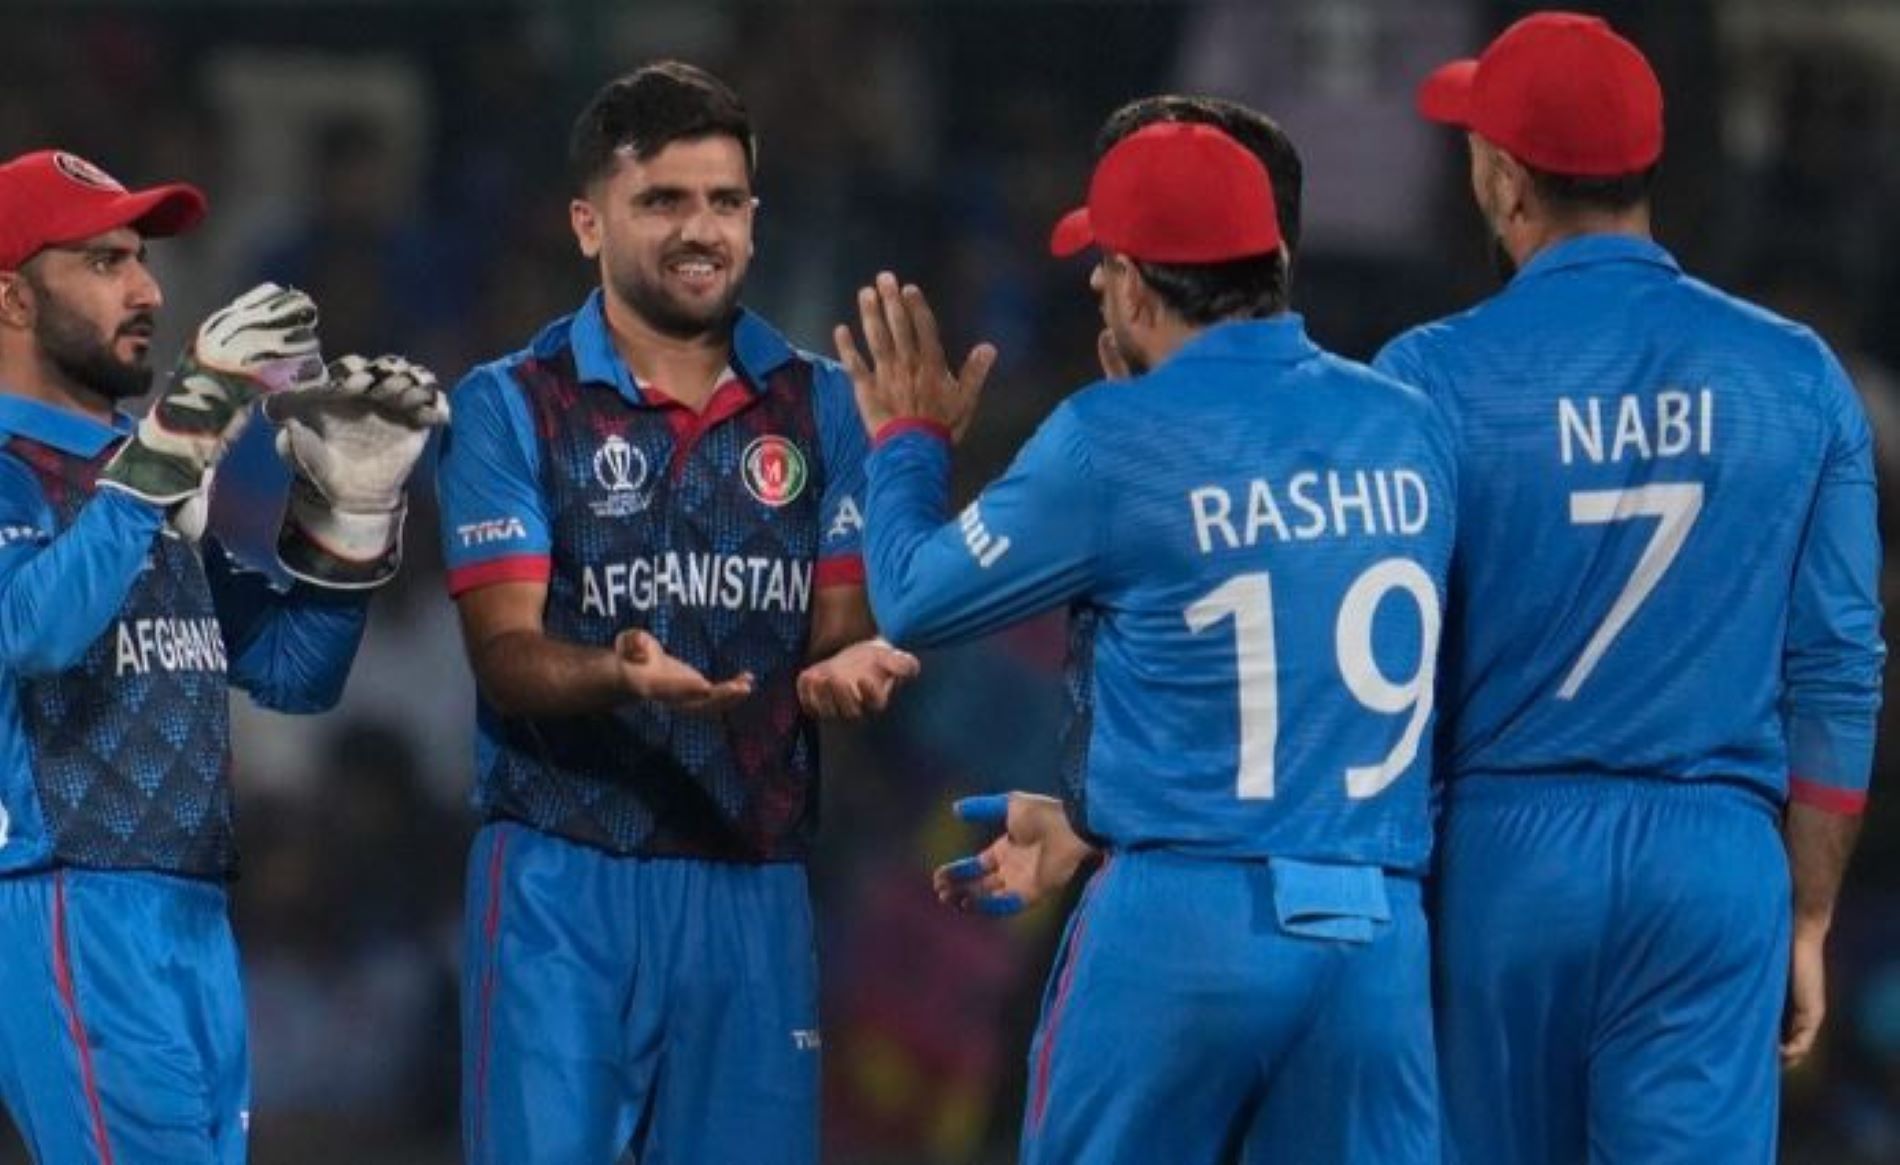 Afghanistan have already pulled off two stunning upsets in the World Cup.